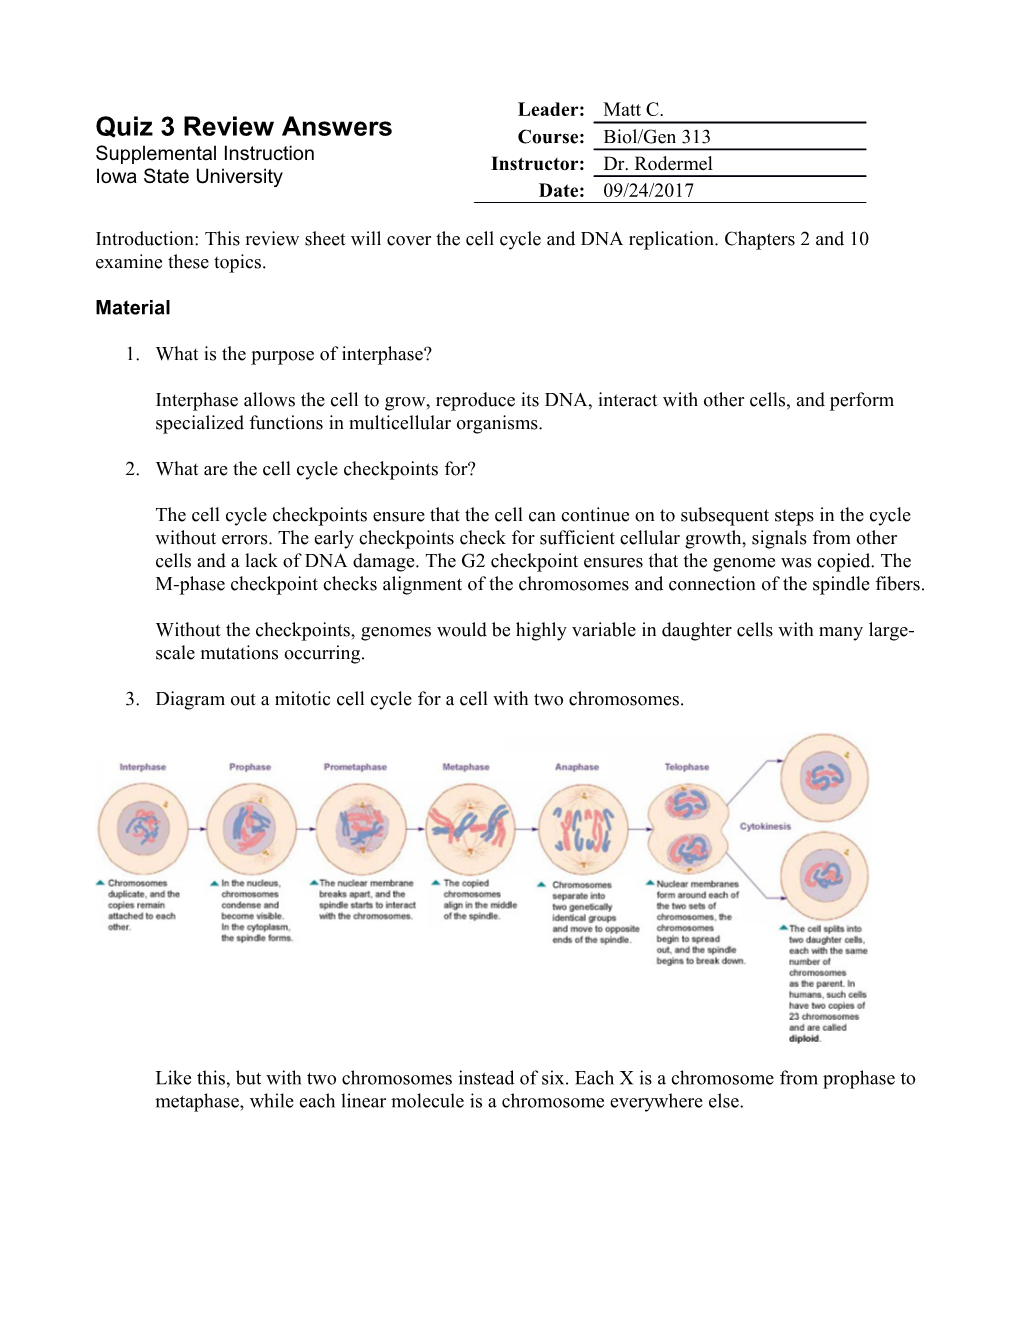 Introduction: This Review Sheet Will Cover the Cell Cycle and DNA Replication. Chapters